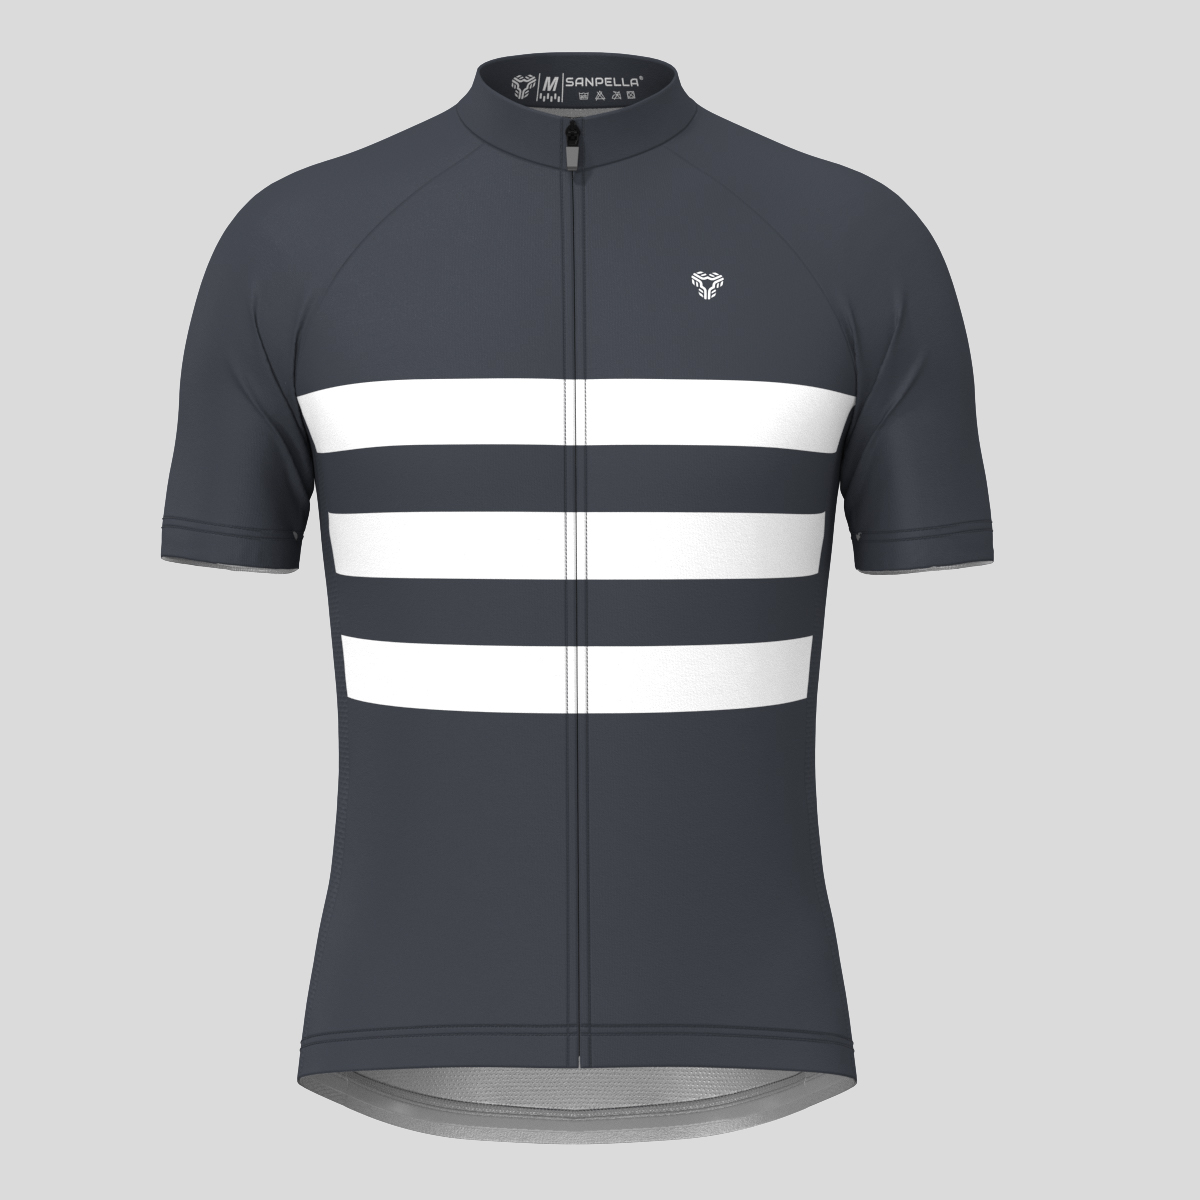 Men's Classic Stripes Cycling Jersey - Graphite